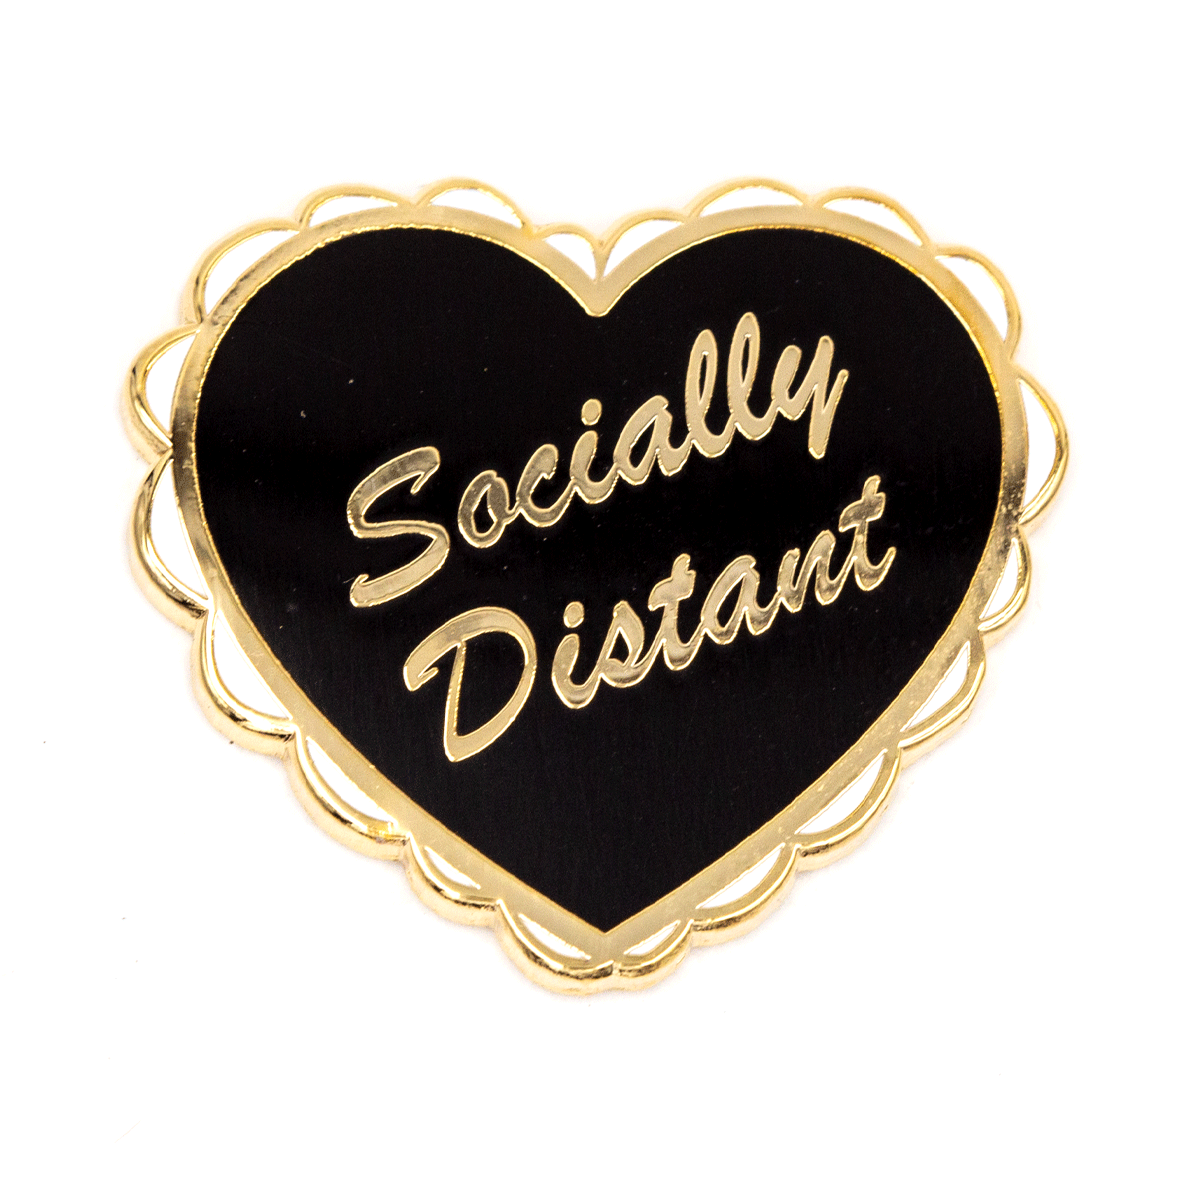 These Are Things - Socially Distant Enamel Pin